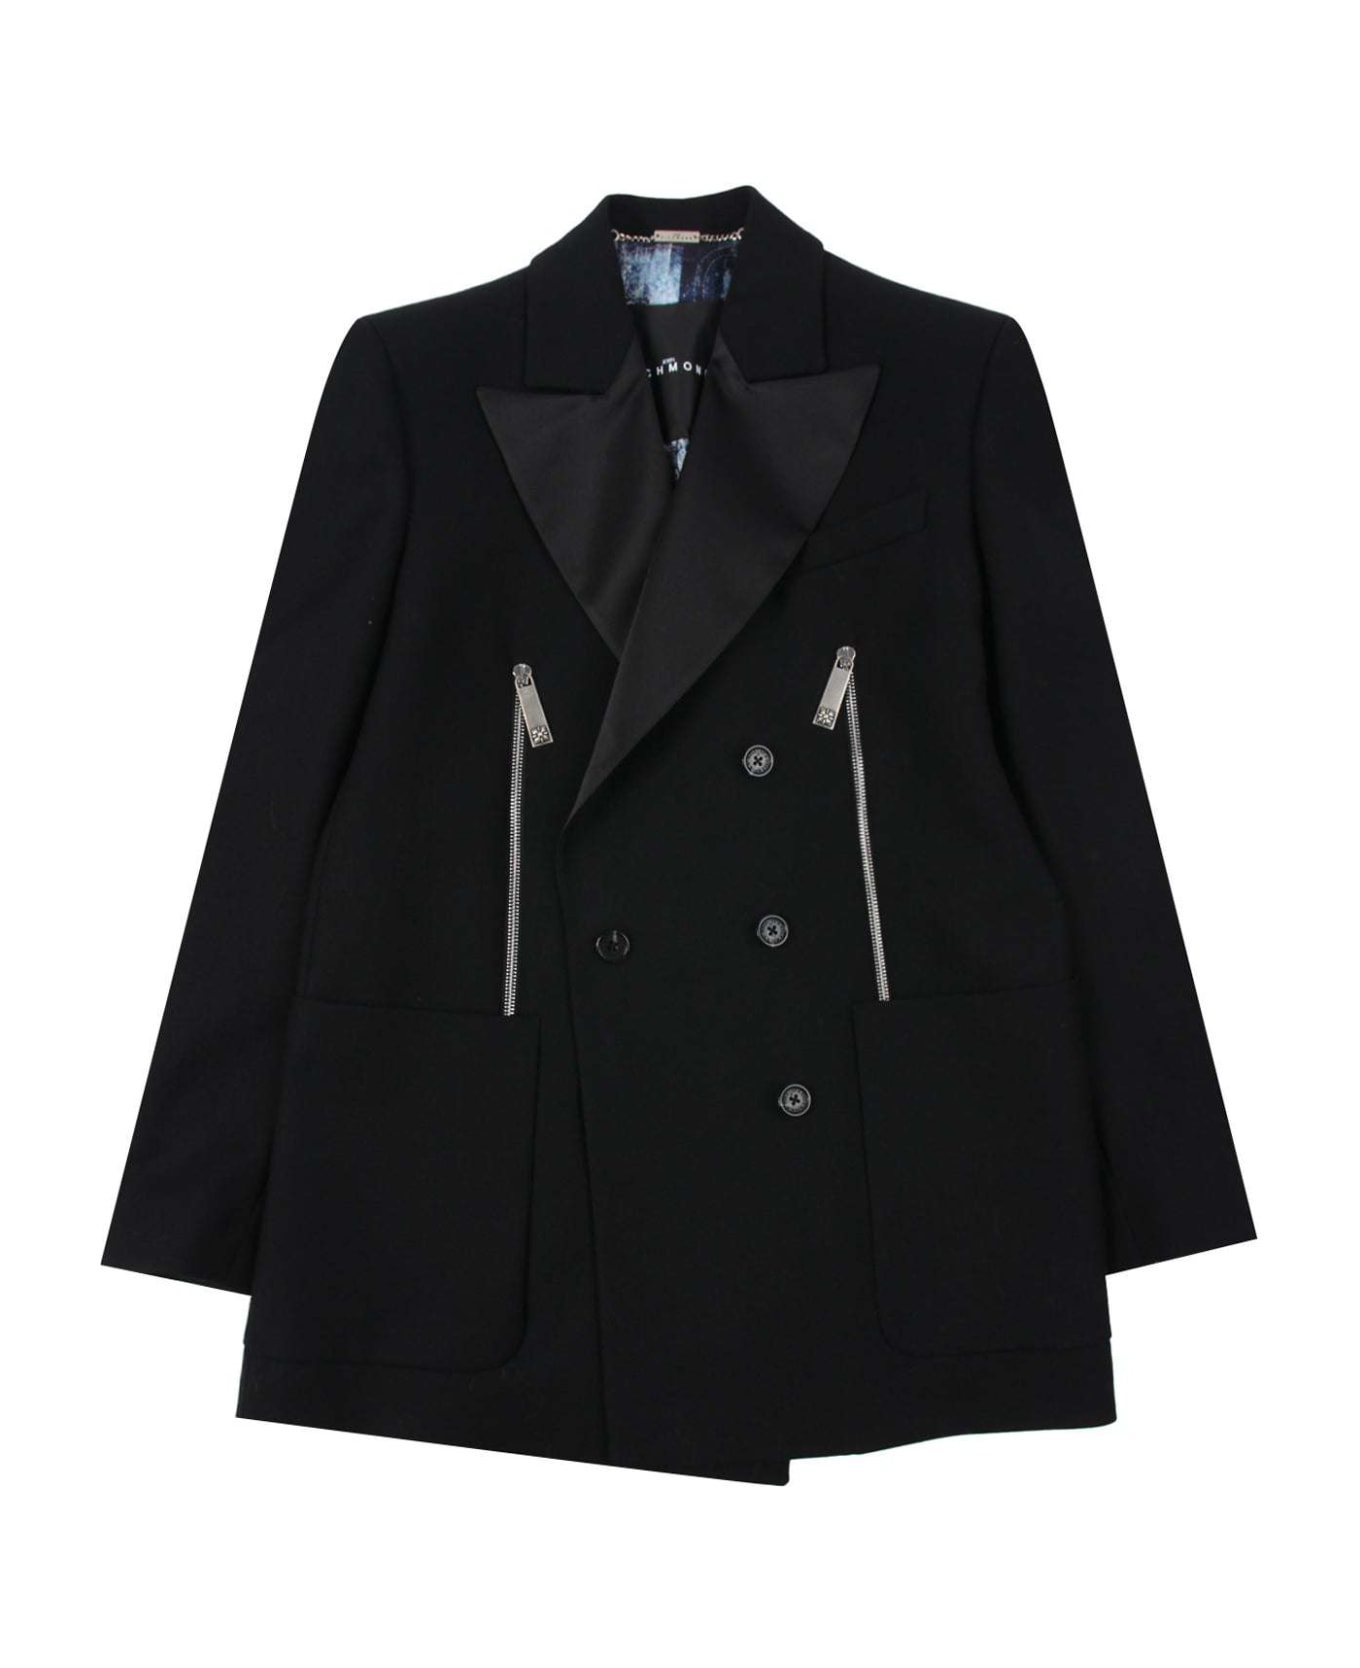 John Richmond Double-breasted Blazer In 100% Virgin Wool With Contrasting Collar And Side Zips. - Nero